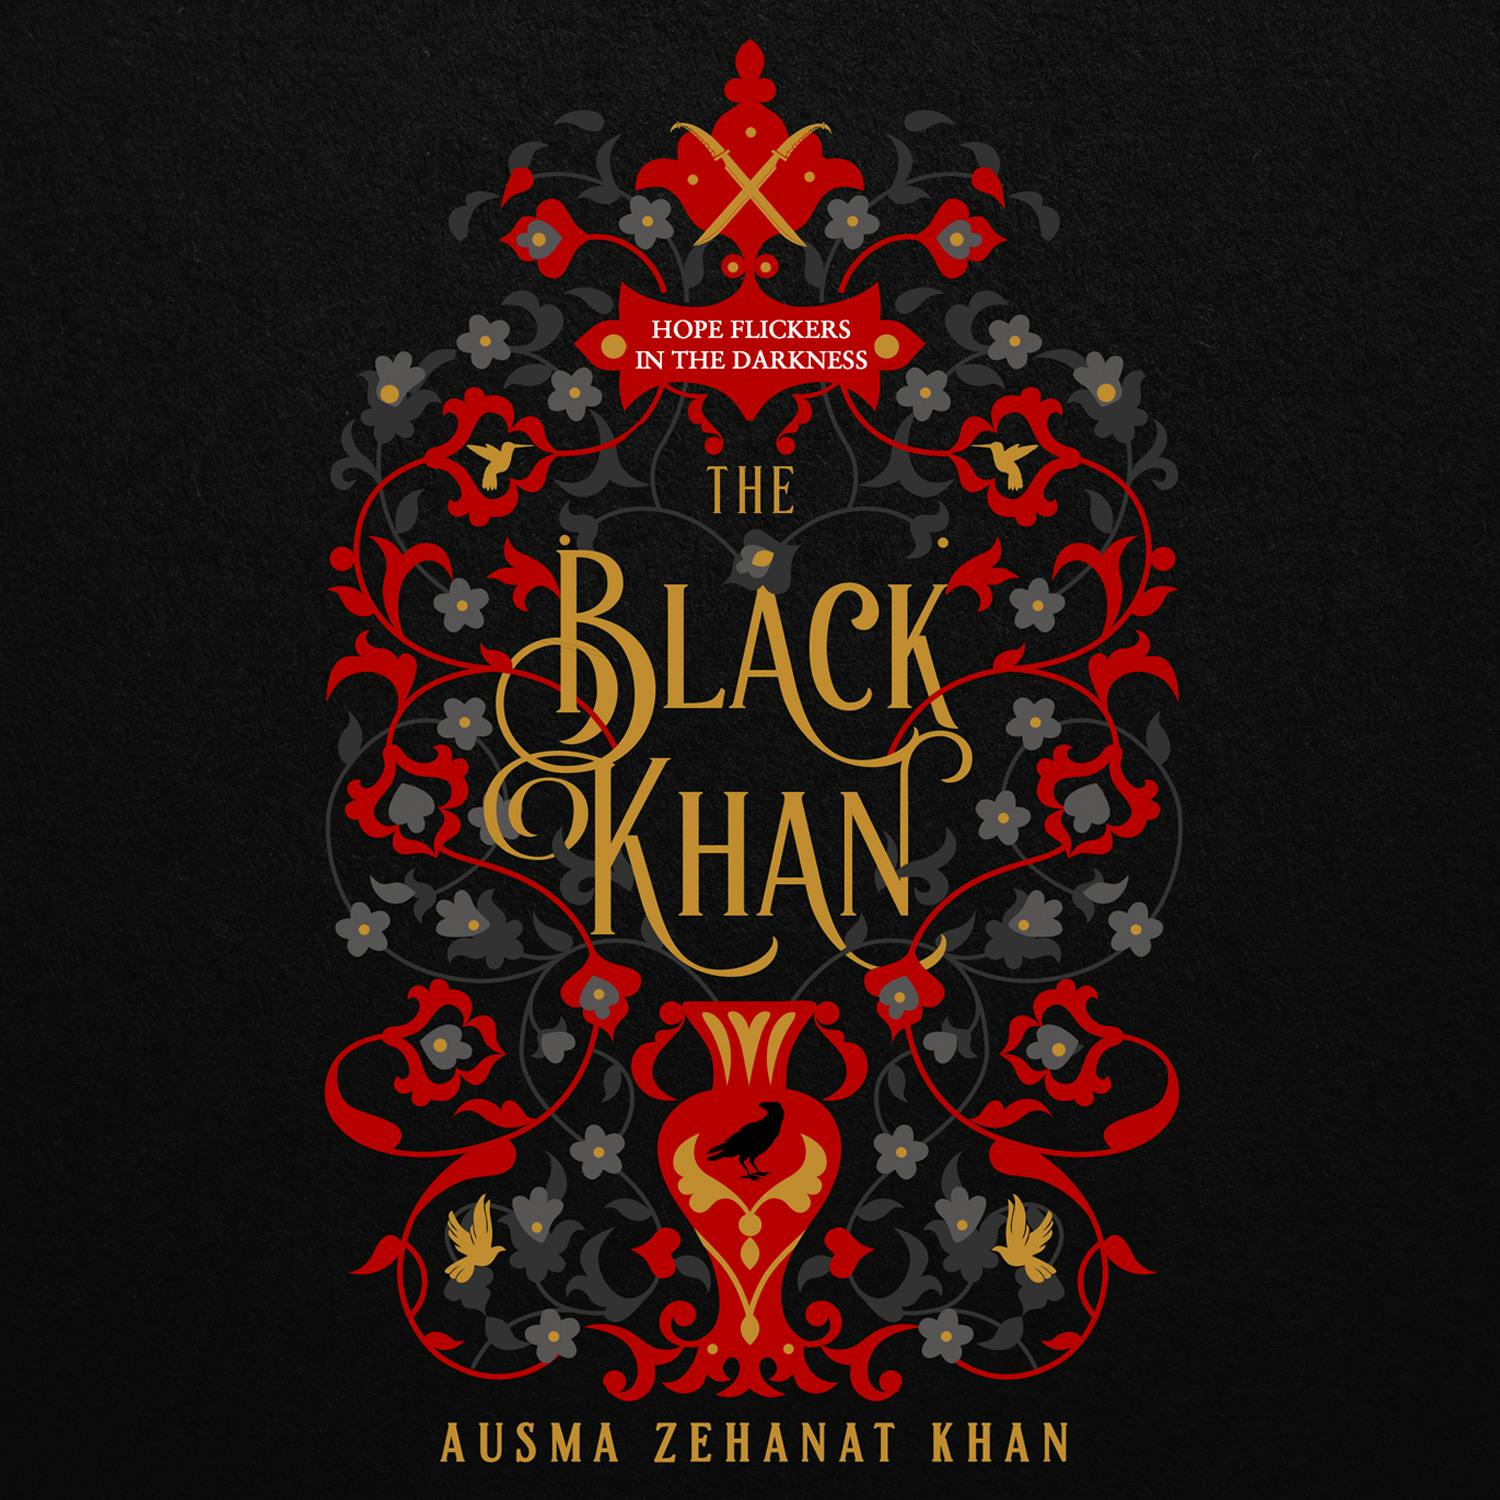 The Black Khan - undefined